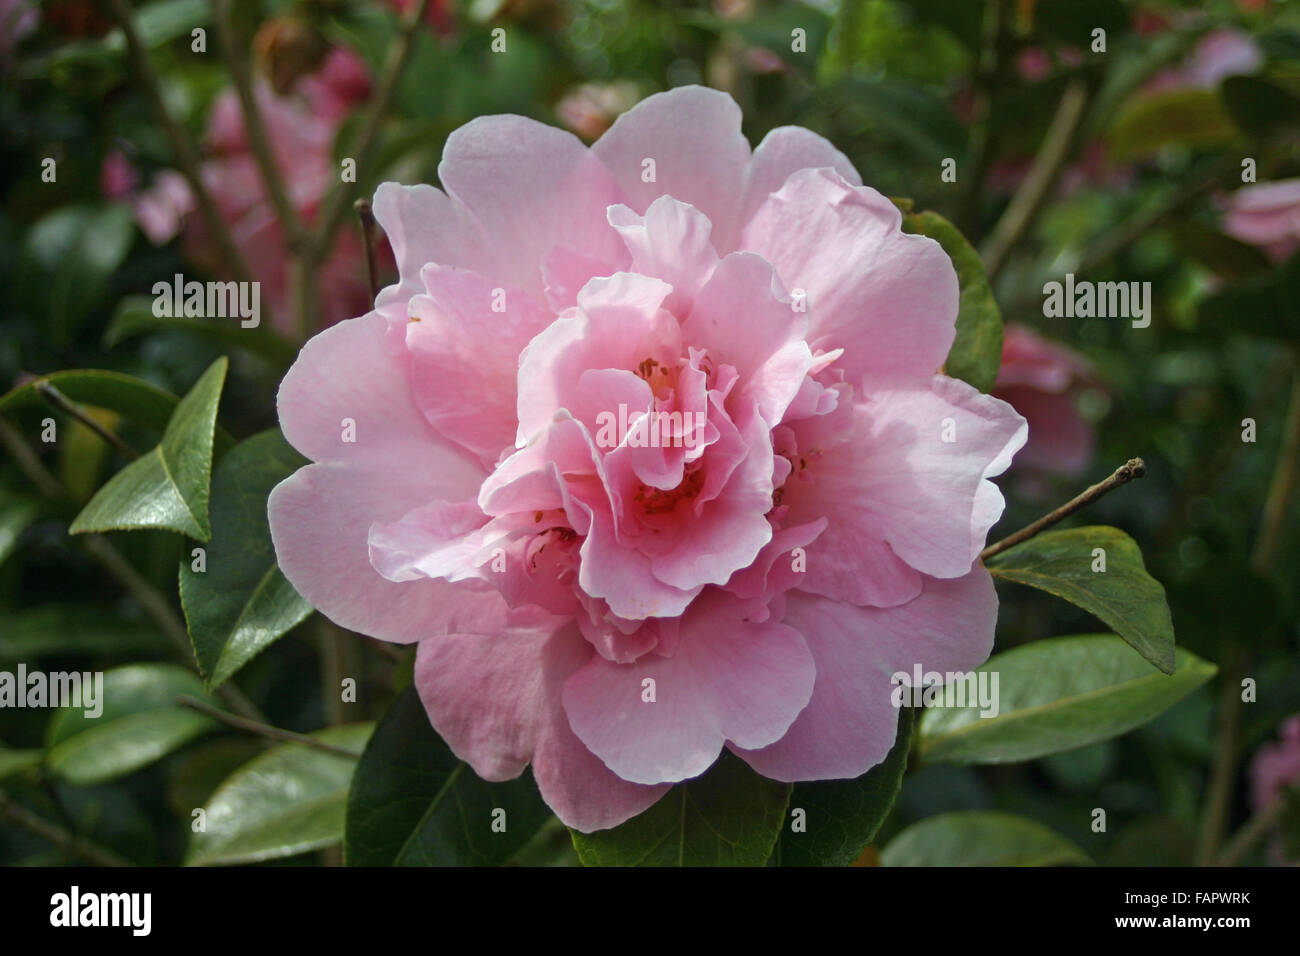 Pink Camellia flower Stock Photo